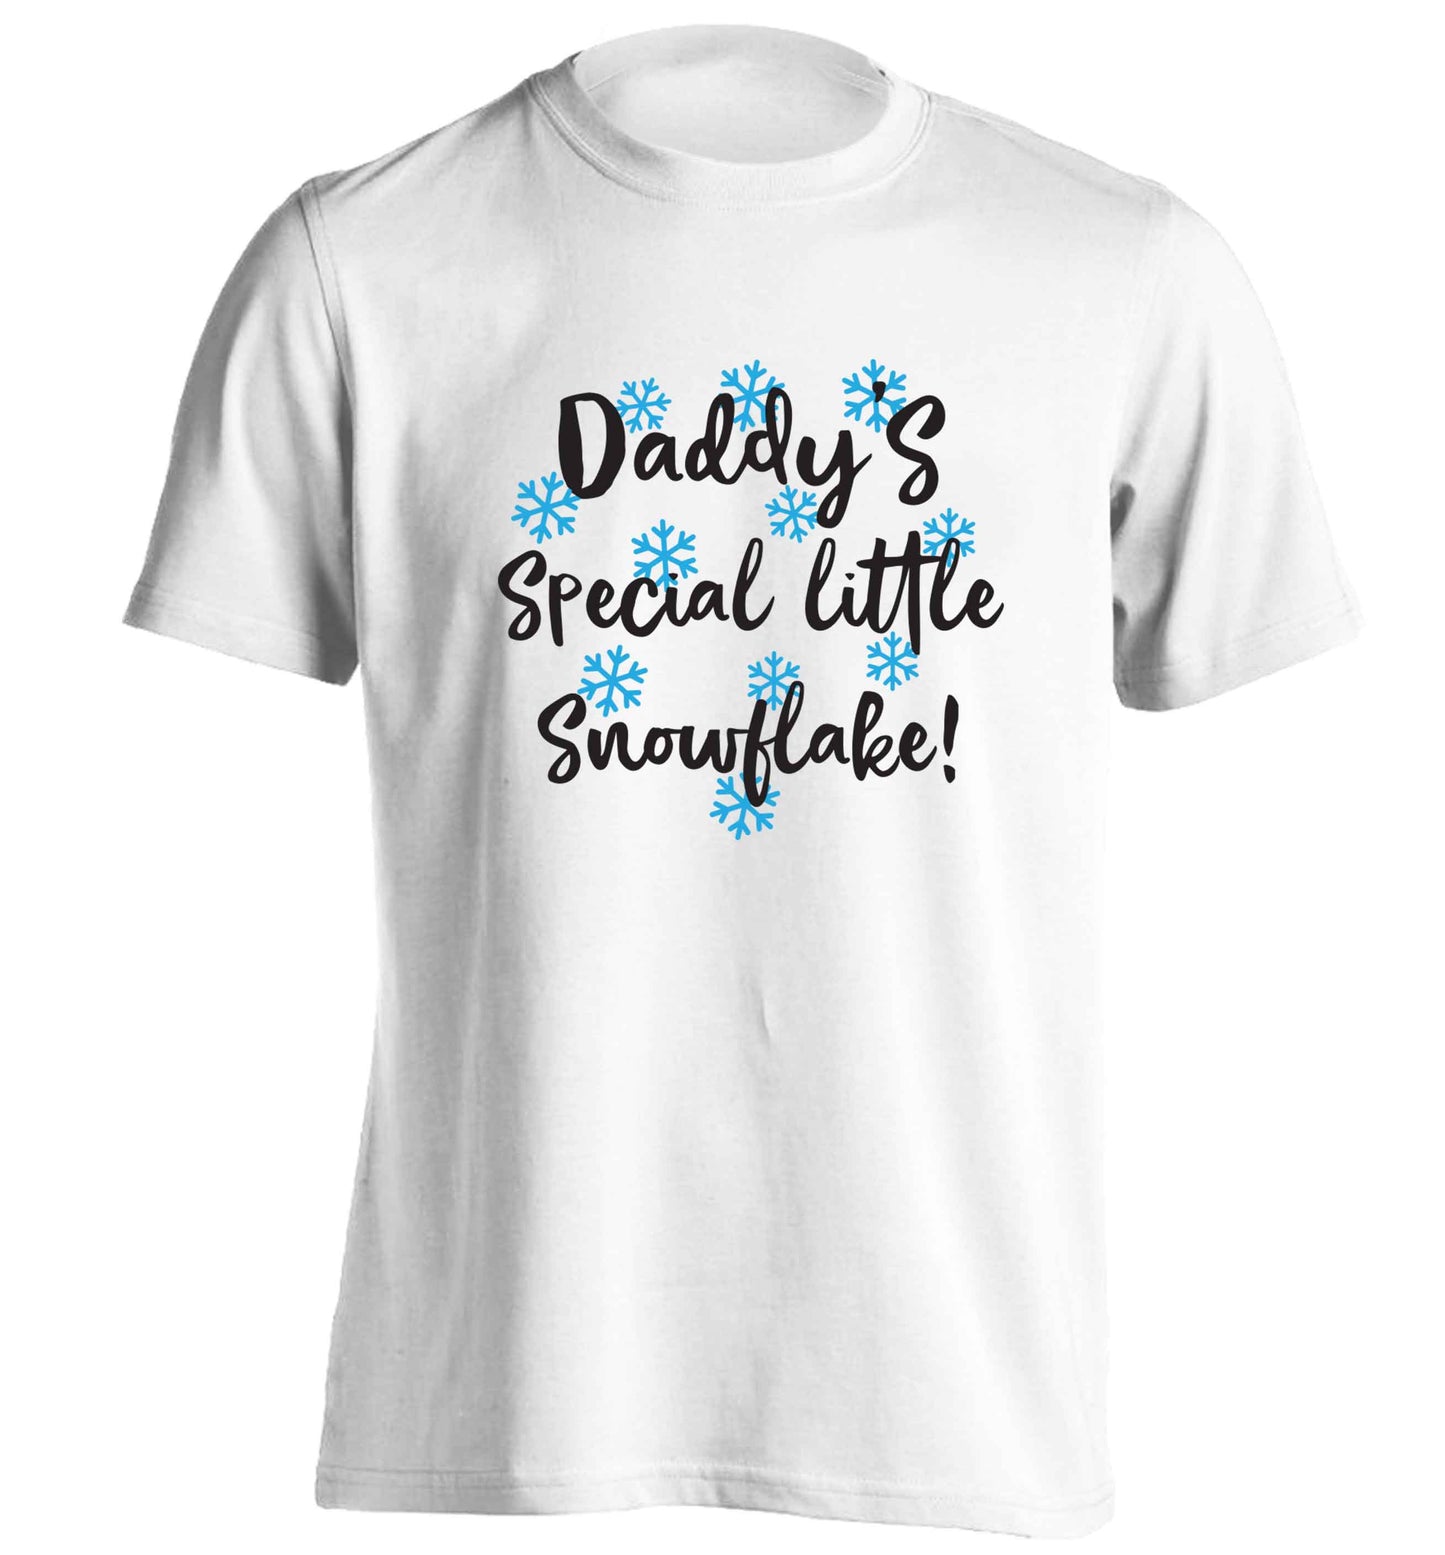 Daddy's special little snowflake adults unisex white Tshirt 2XL